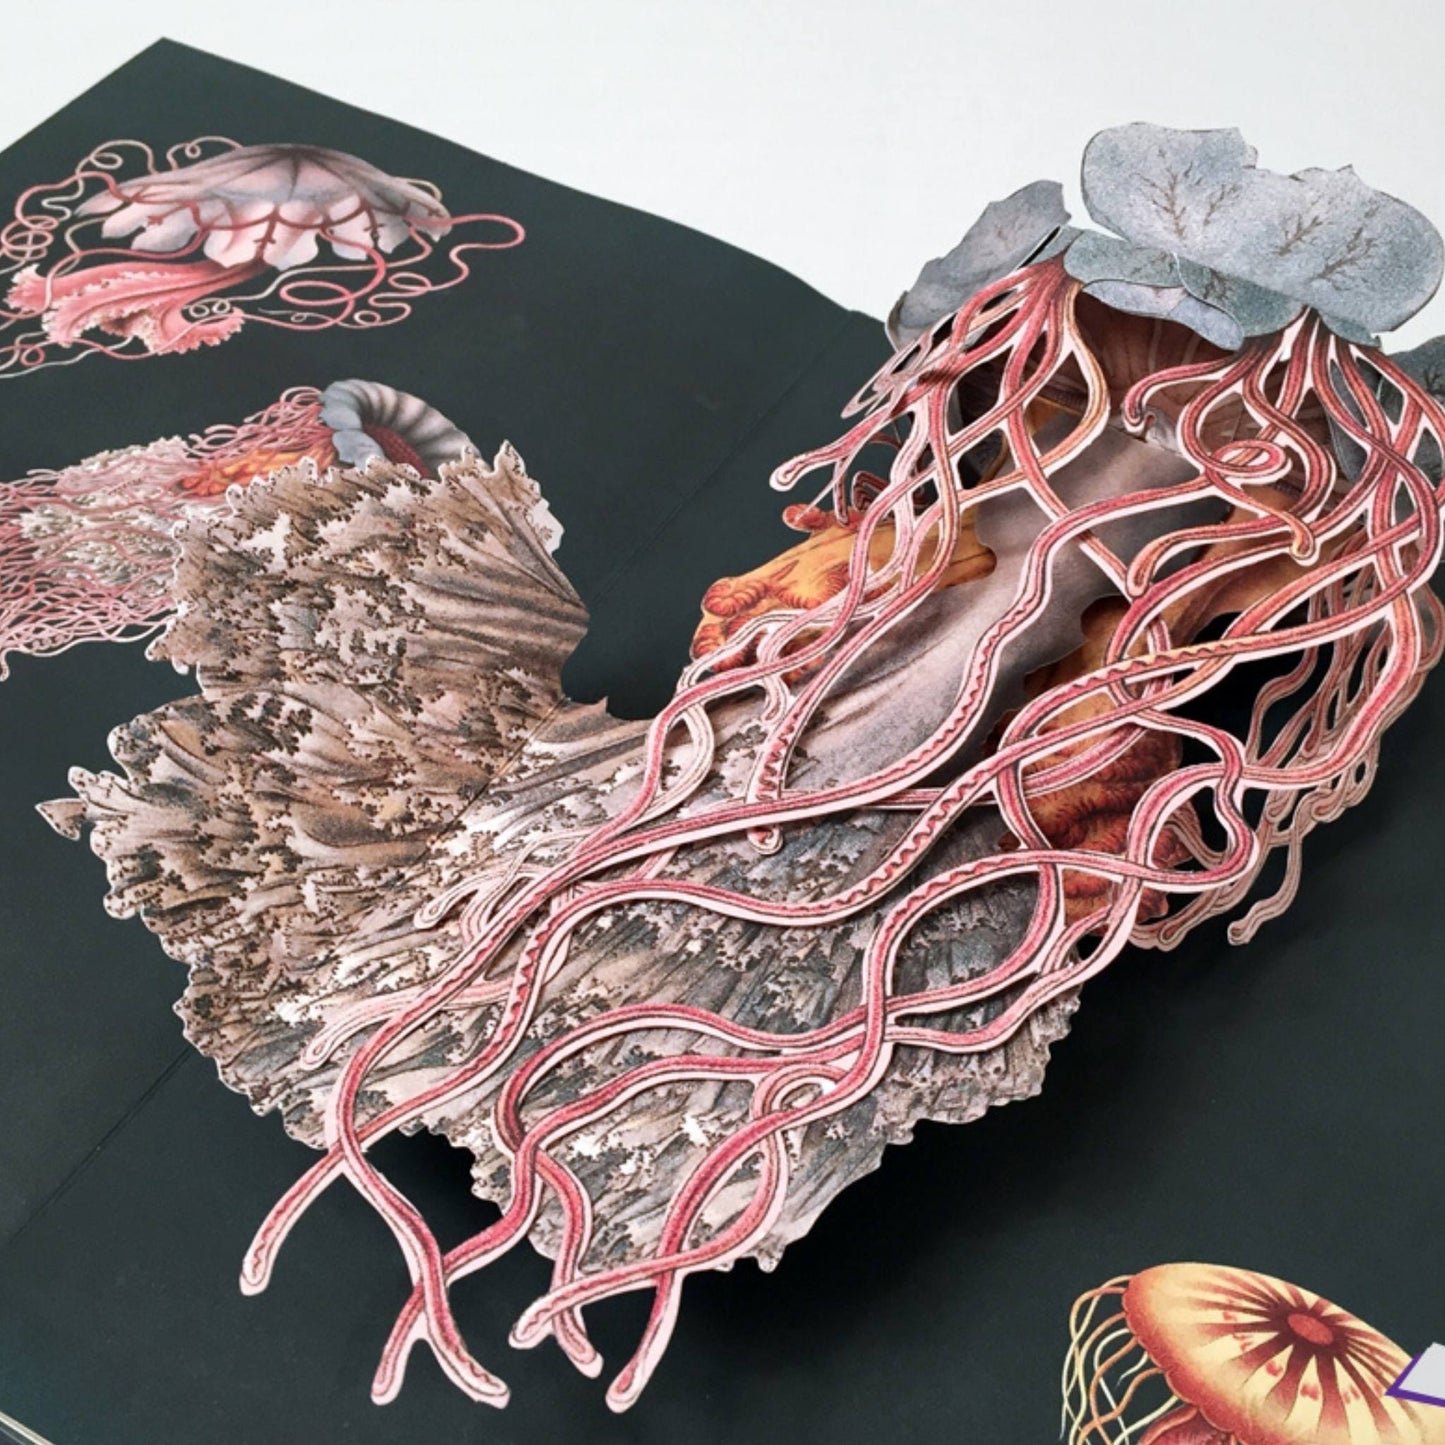 Creatures of the Deep - The Pop-Up Book